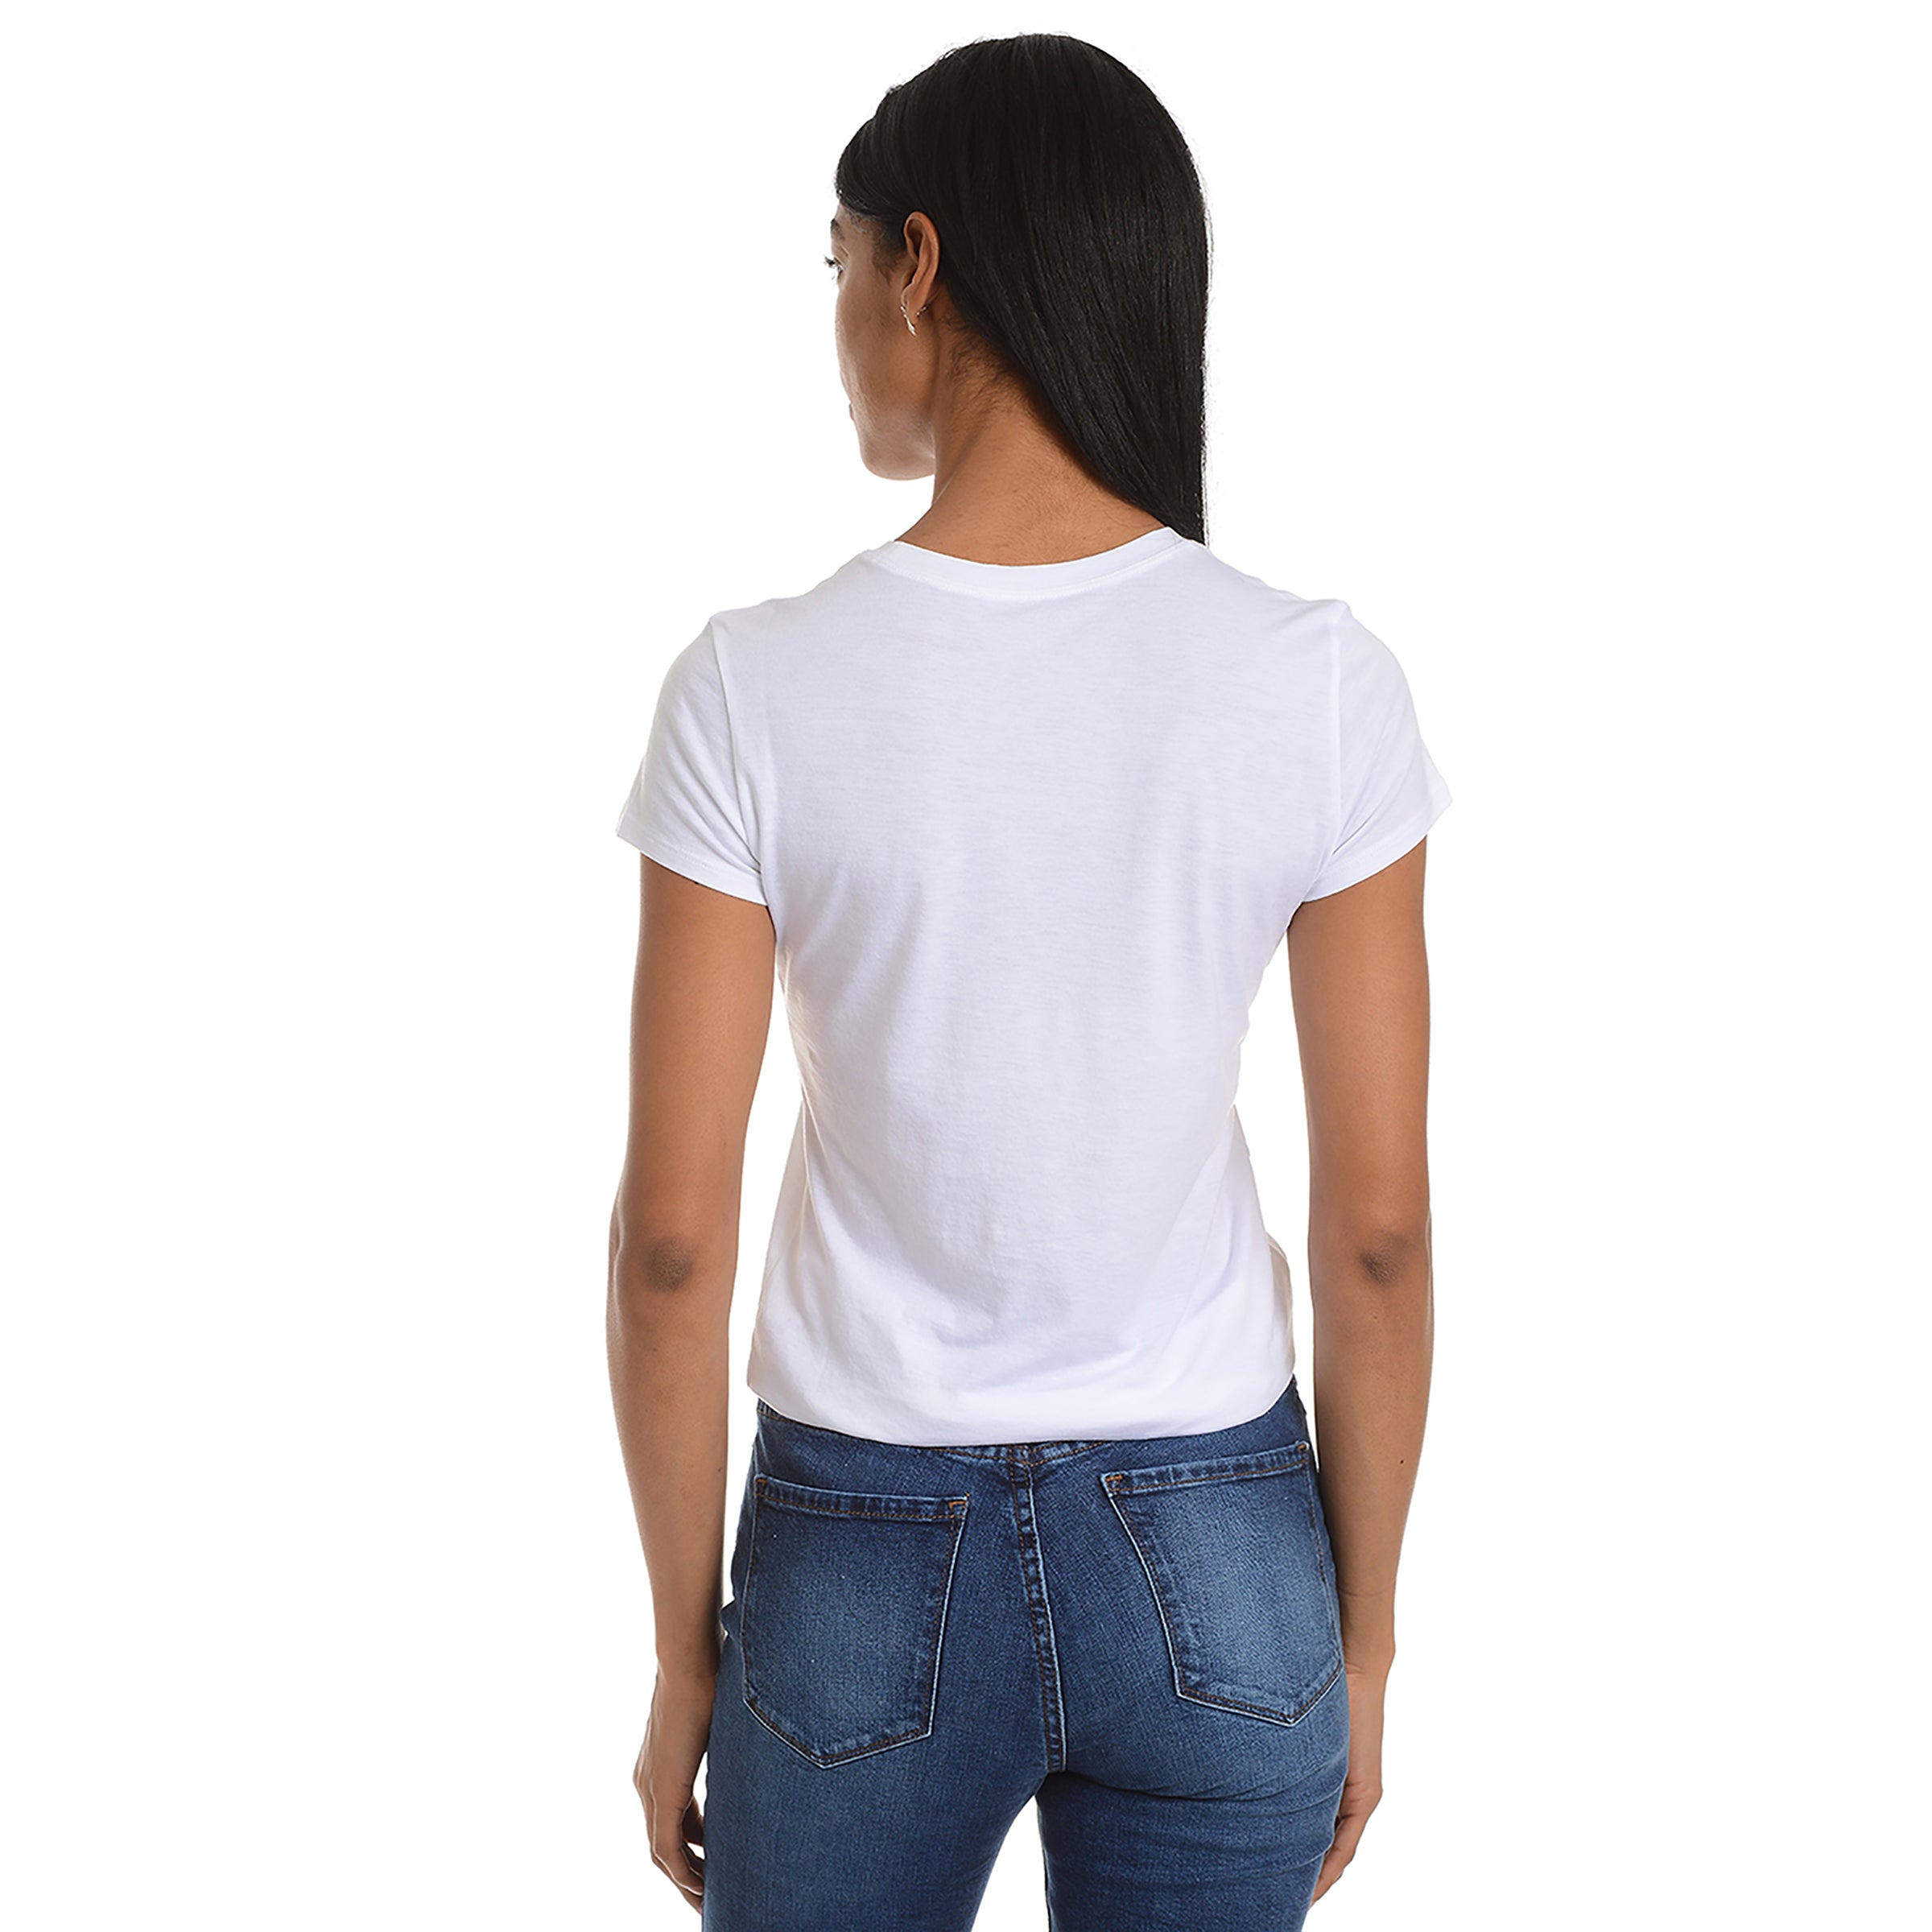 Women wearing Blanc Fitted Crew Marcy Tee